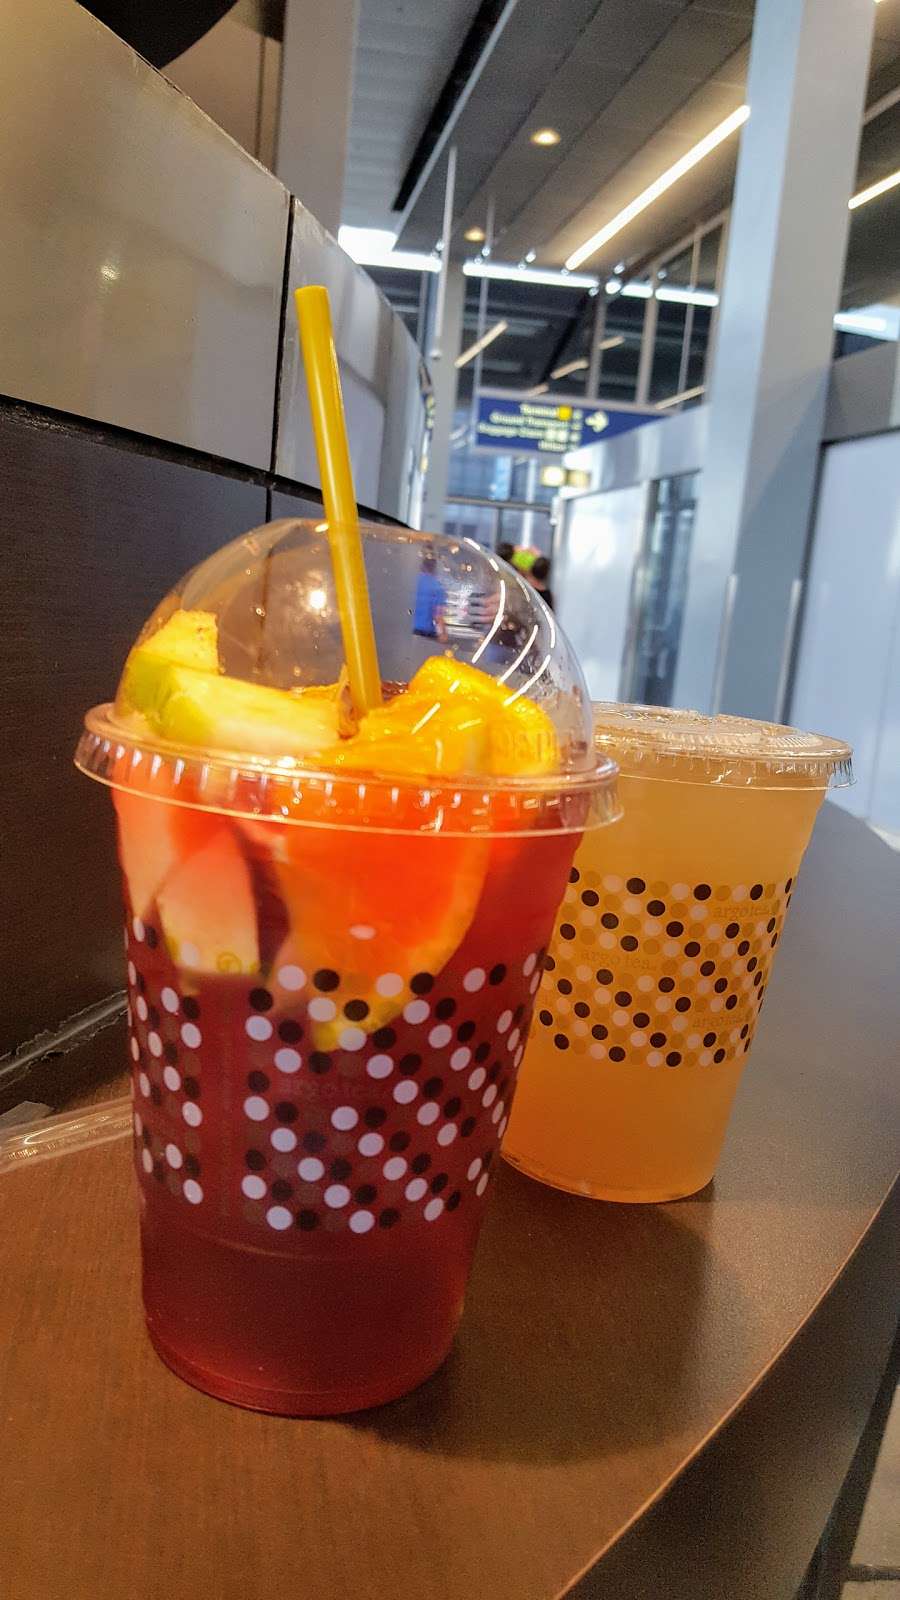 Argo Tea | OHare International Airport (ORD, Between Gates H and G, Terminal 3, Chicago, IL 60666 | Phone: (773) 663-4175